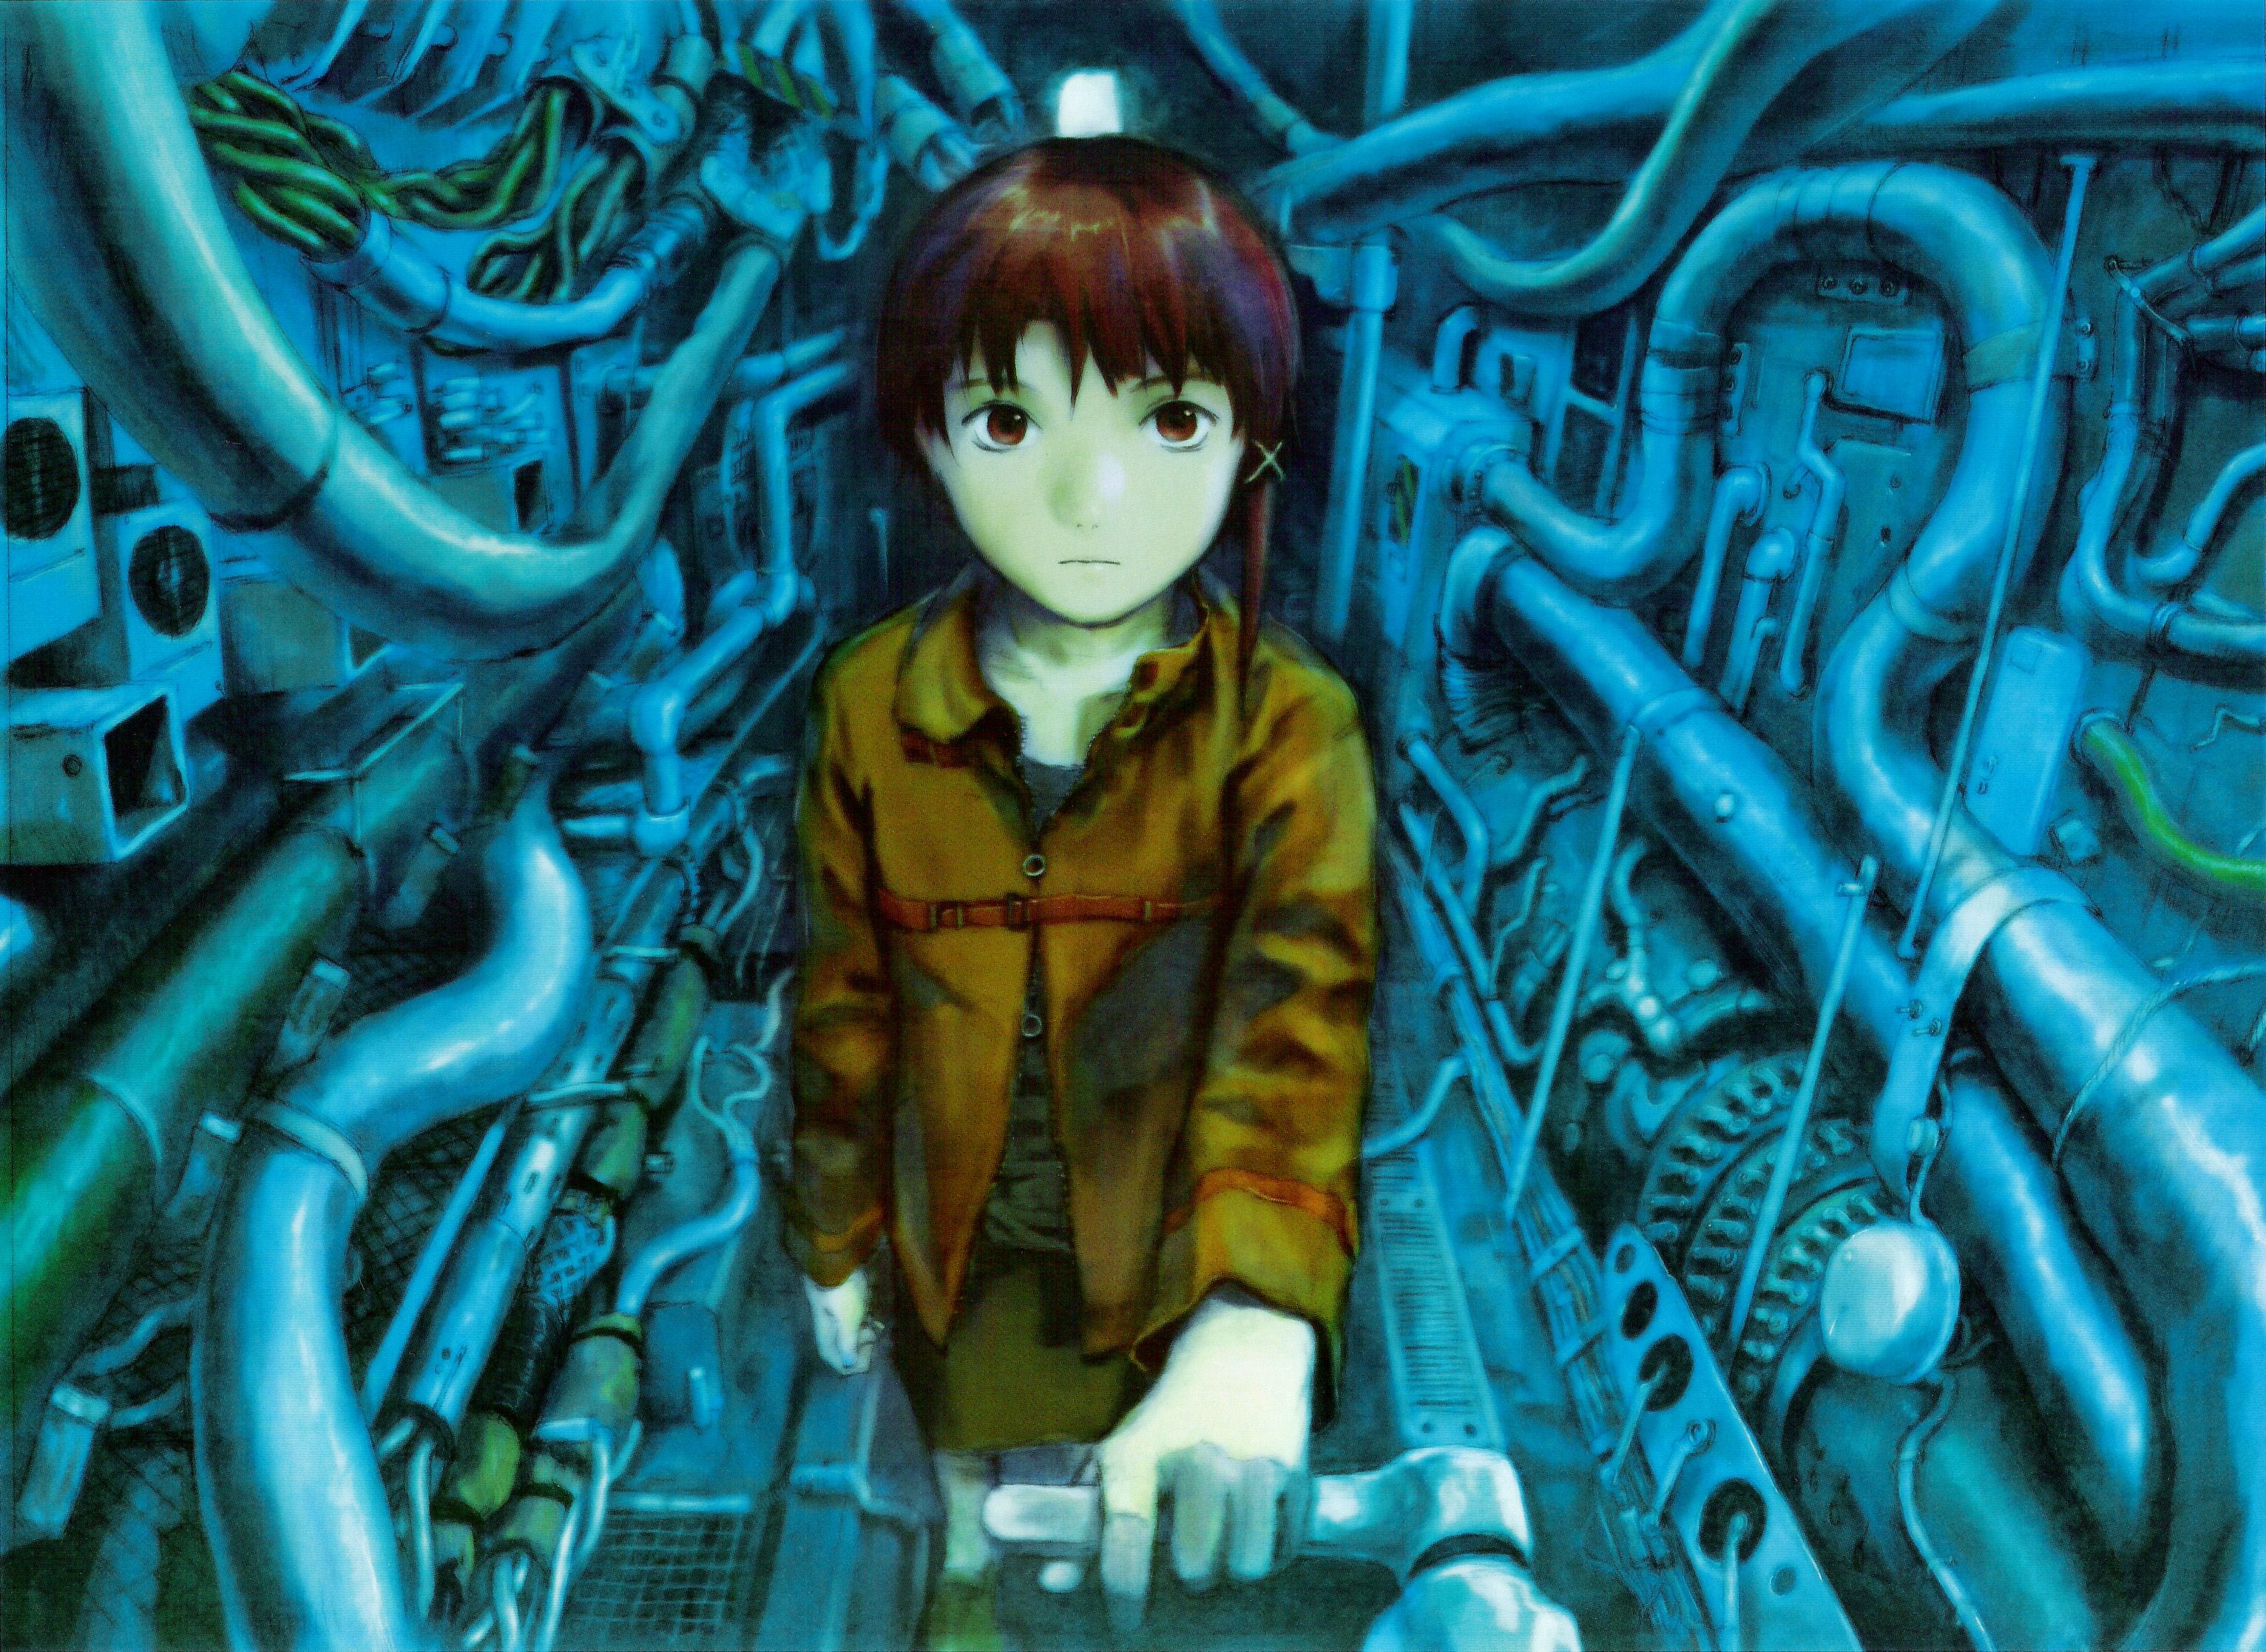 Serial Experiments Lain HD Wallpaper. Background Imagex2234